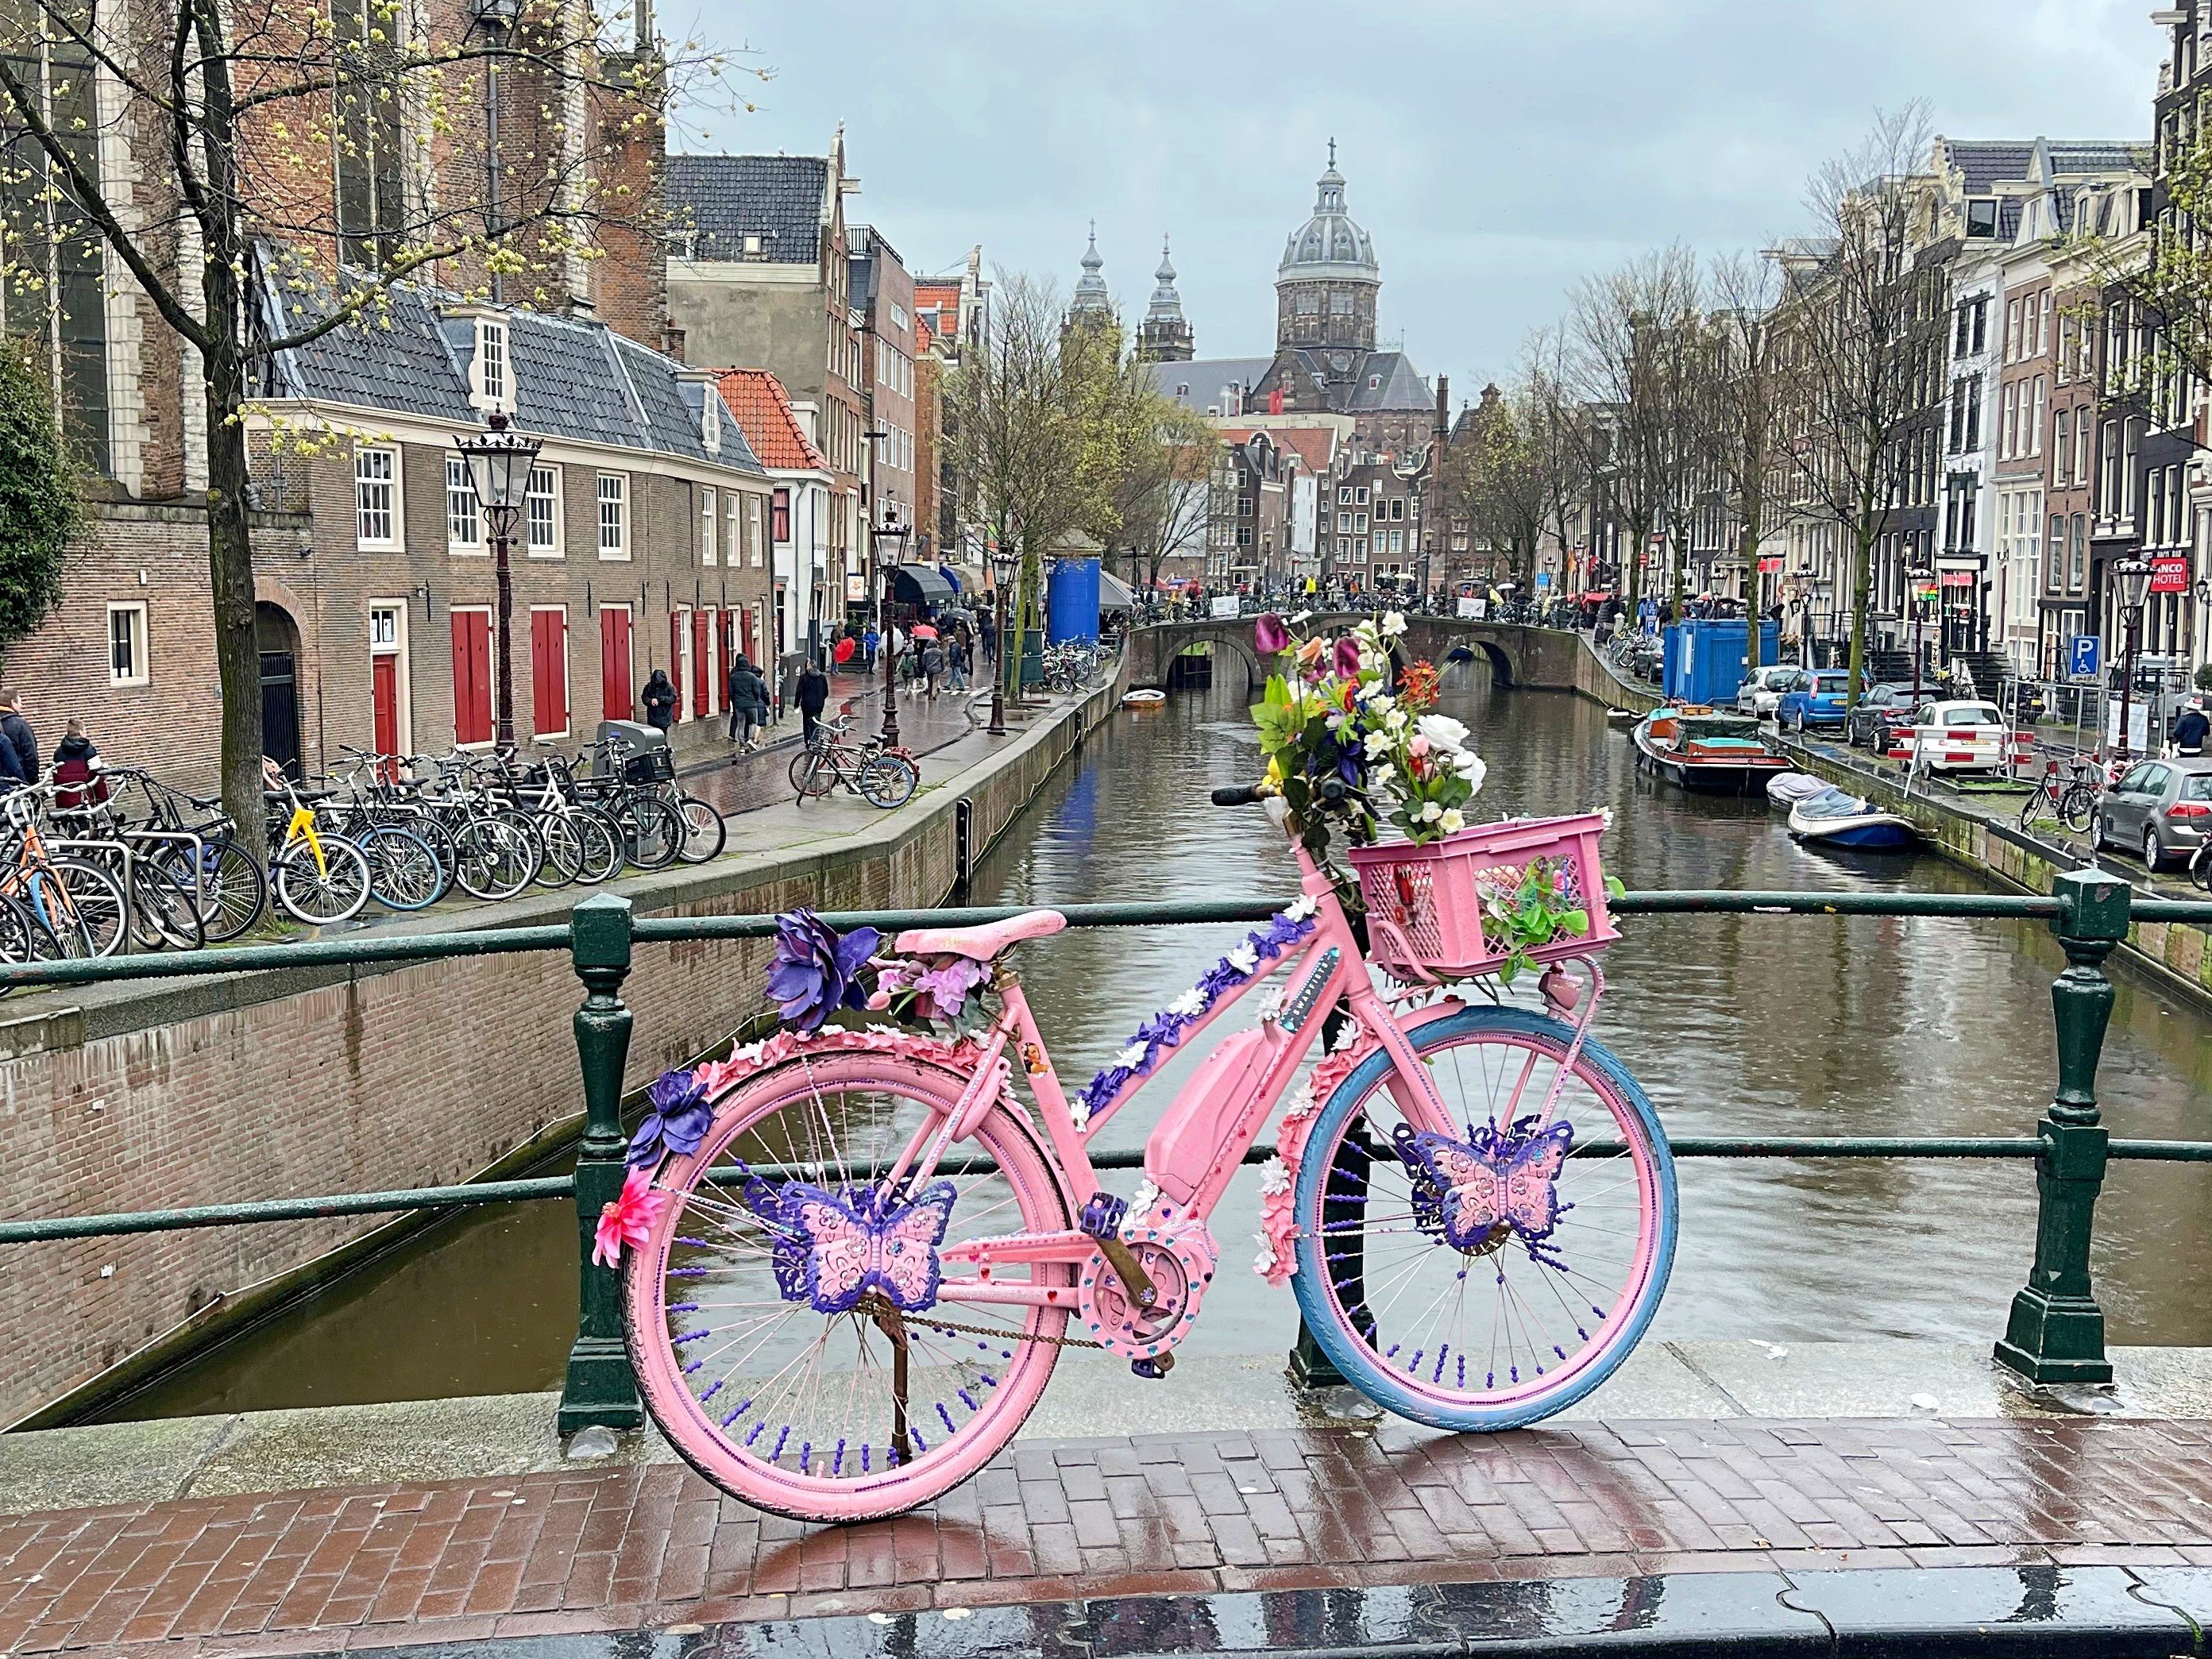 Apart from Amsterdam’s canals, red-light district and museums, visitors to the Dutch capital can also look for other icons of the city, such as colourful flower bikes (above), historic gable stones and mini-libraries. Photo: Anne Pinto-Rodrigues